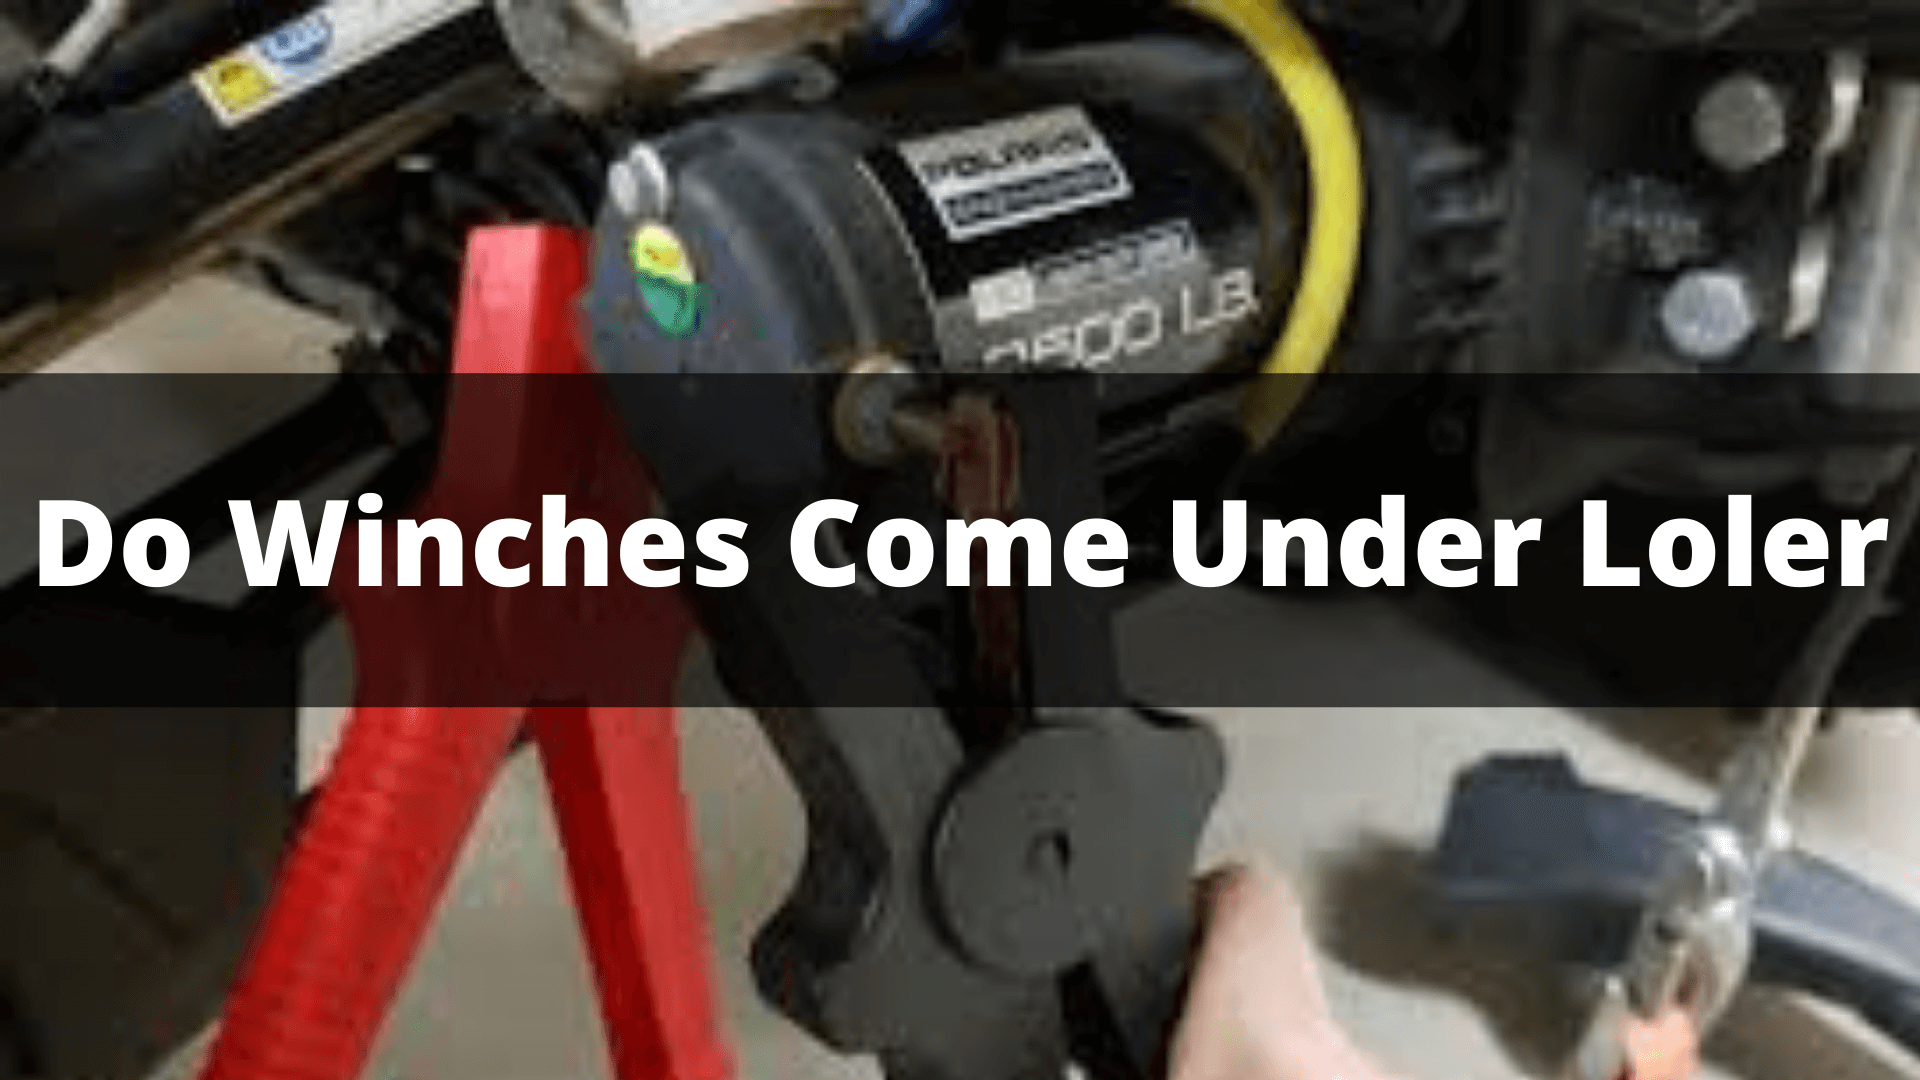 Do Winches Come Under Loler